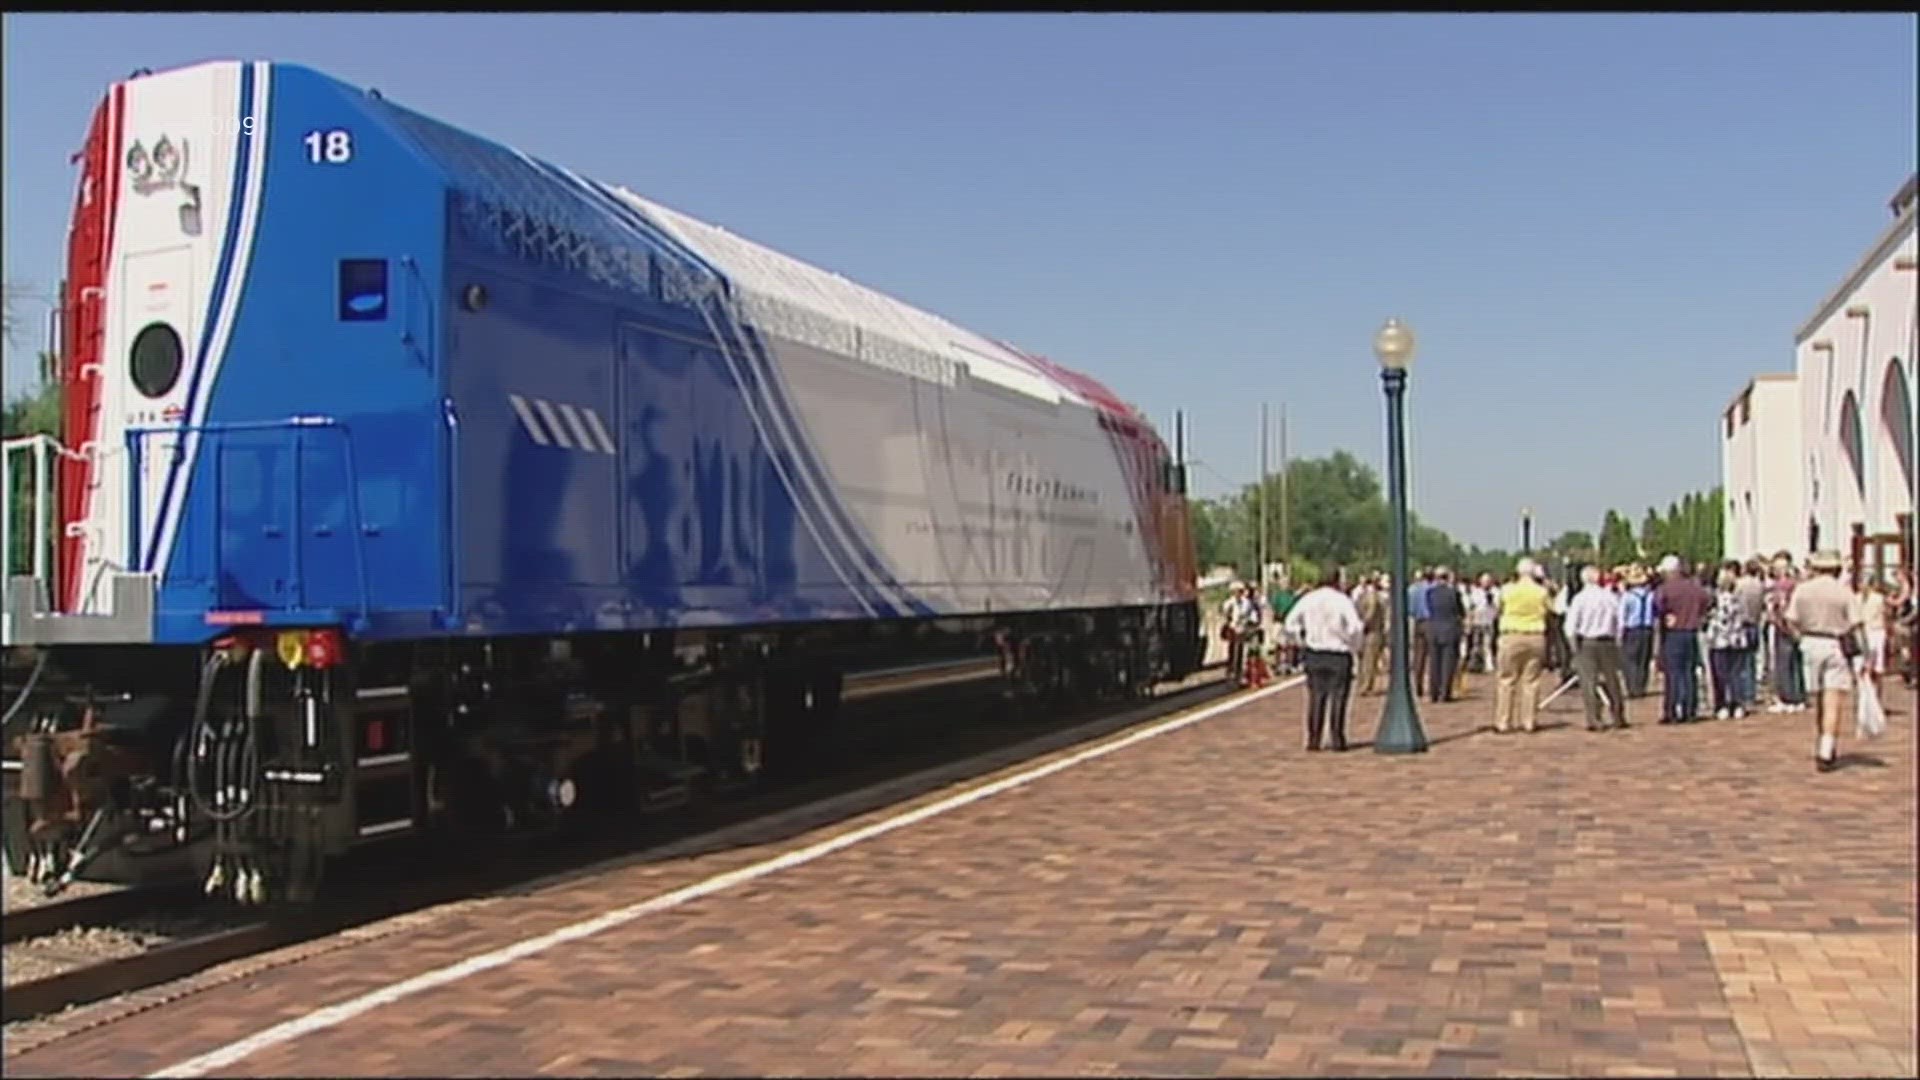 Boise hosted the Greater Northwest Passenger Rail Summit bringing the Amtrak CEO to town. The Treasure valley lost Amtrak service in 1997.